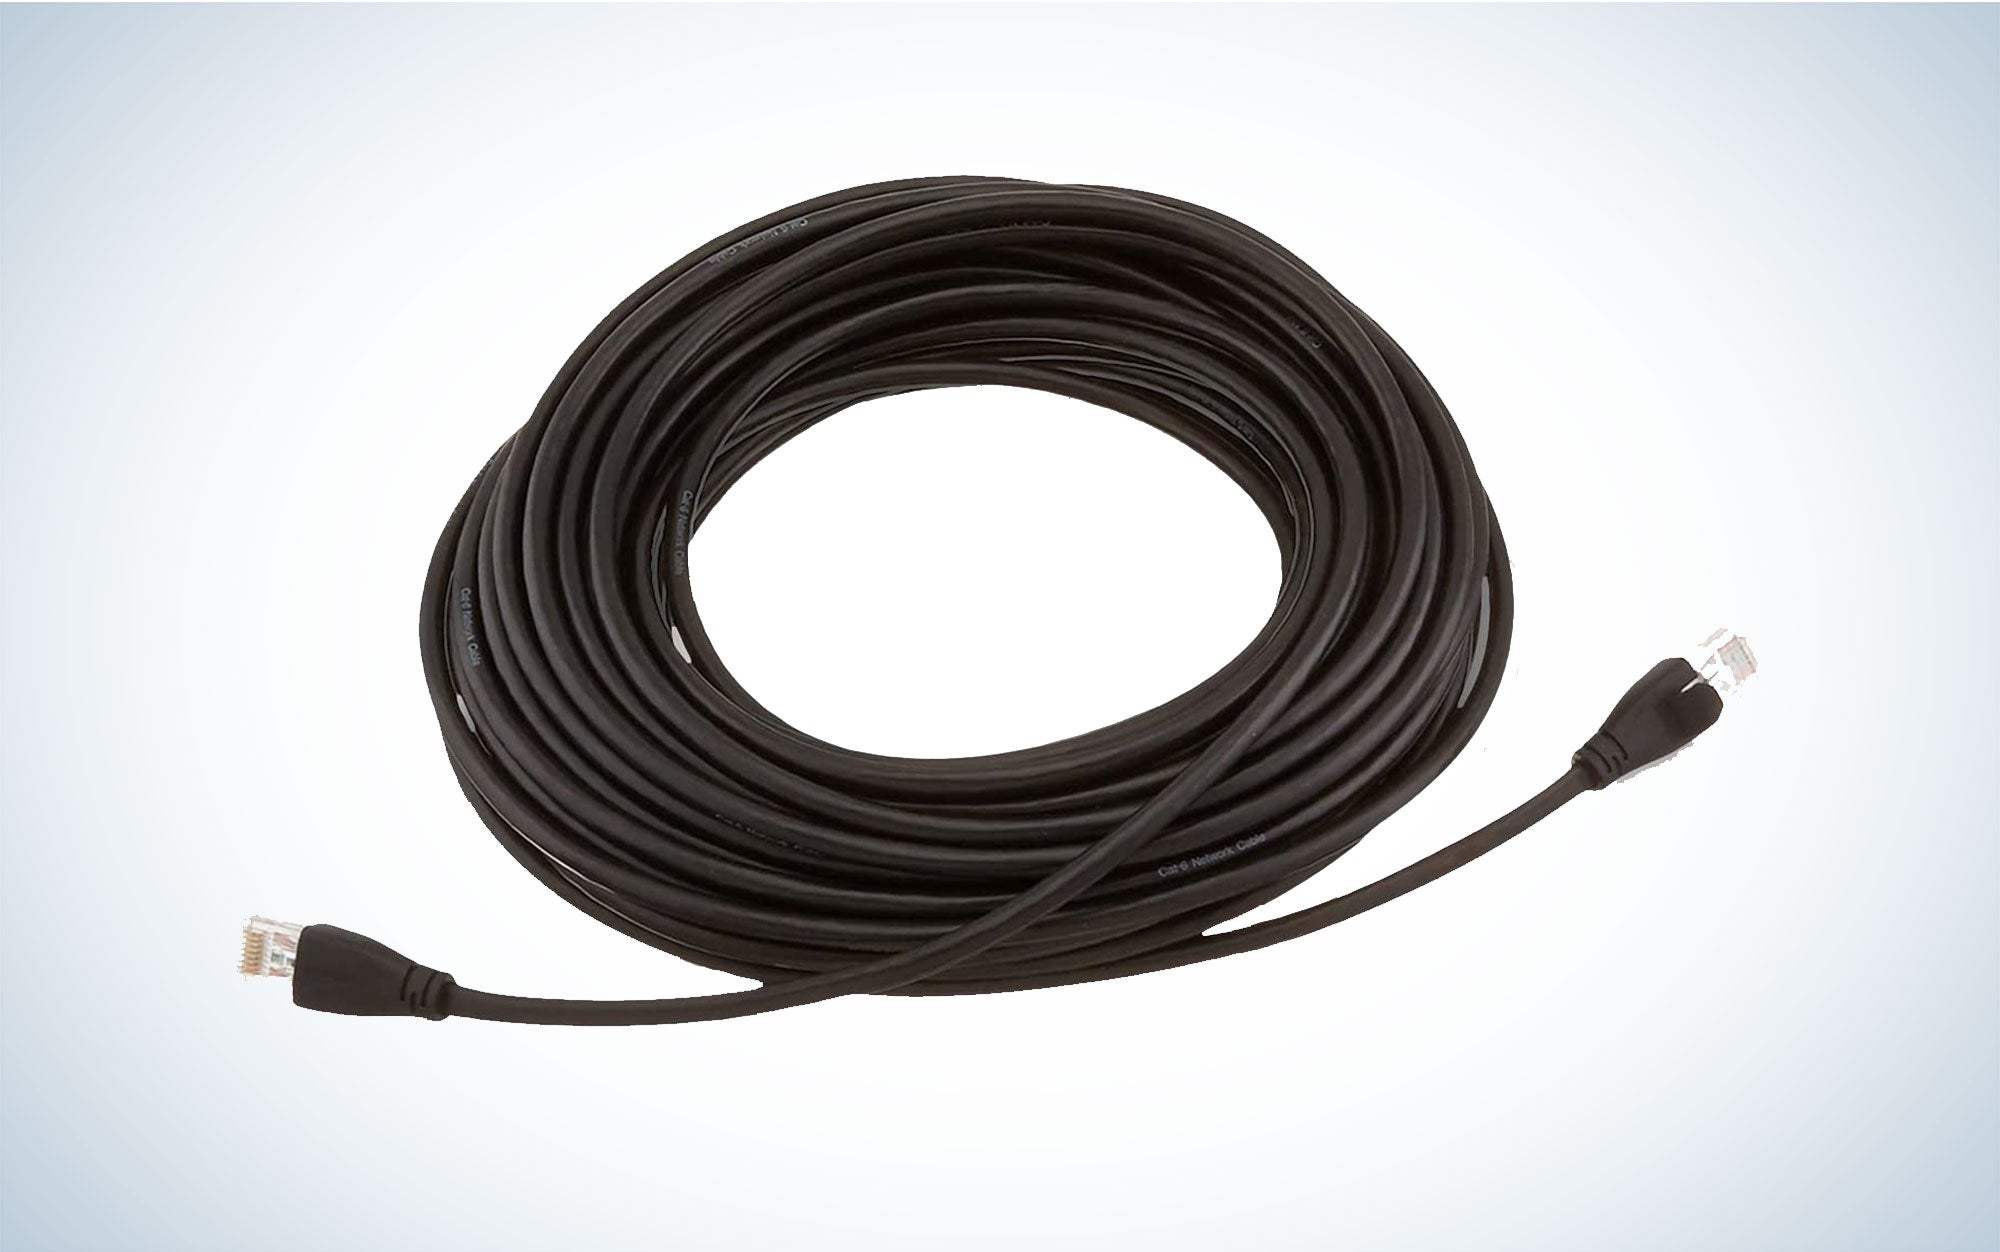 Best Ethernet Cables For Gaming In 2022